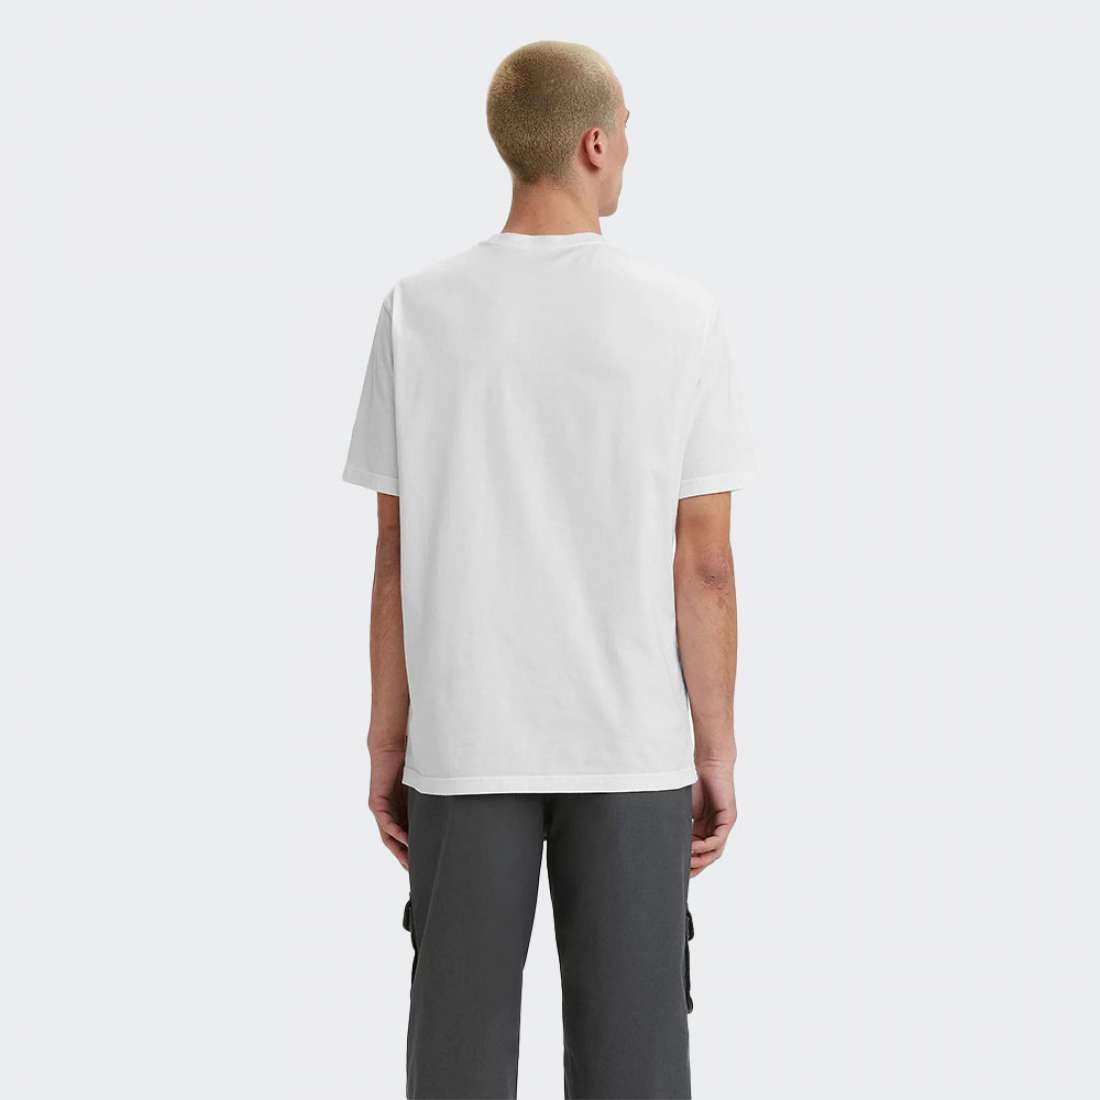 TSHIRT LEVI´S RELAXED SW WHITE/GRA